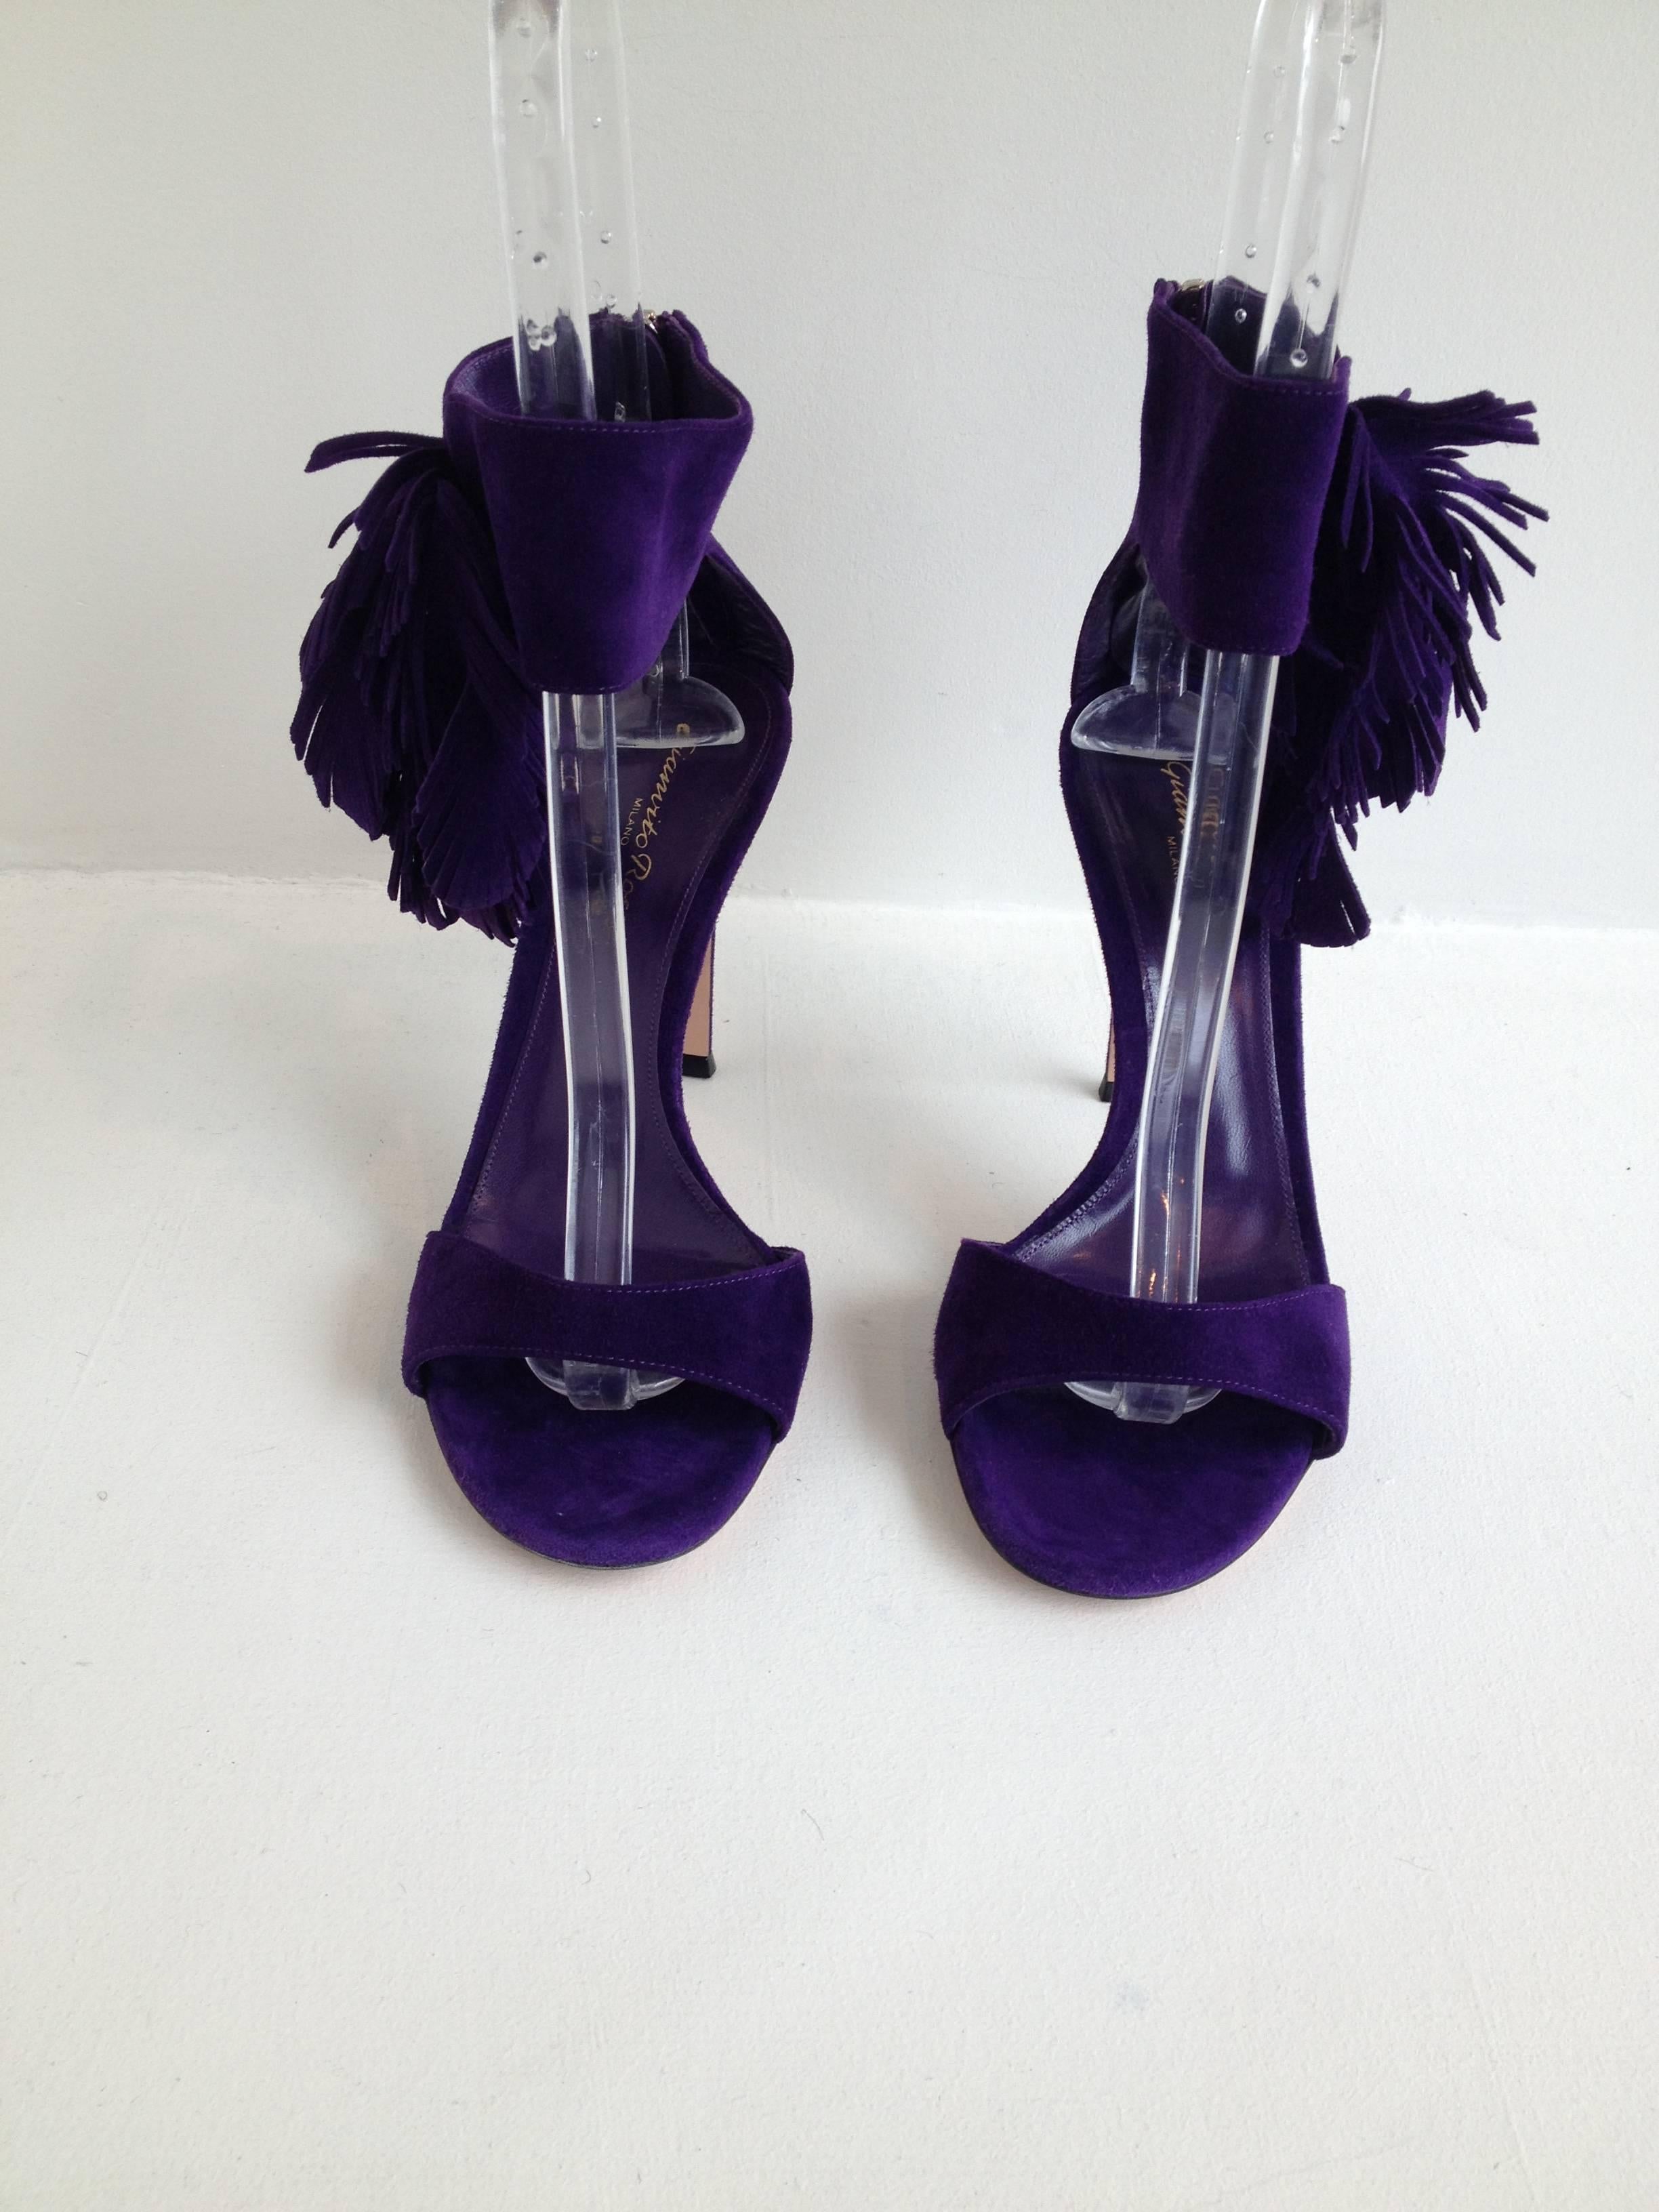 Perfect for summer! This striking and dramatic shoe is made from a gorgeous purple suede, minimalist in cut but embellished with a fabulous little pouf of suede feathers like fringe at the ankles. The heel is four inches and the shoe zips up the